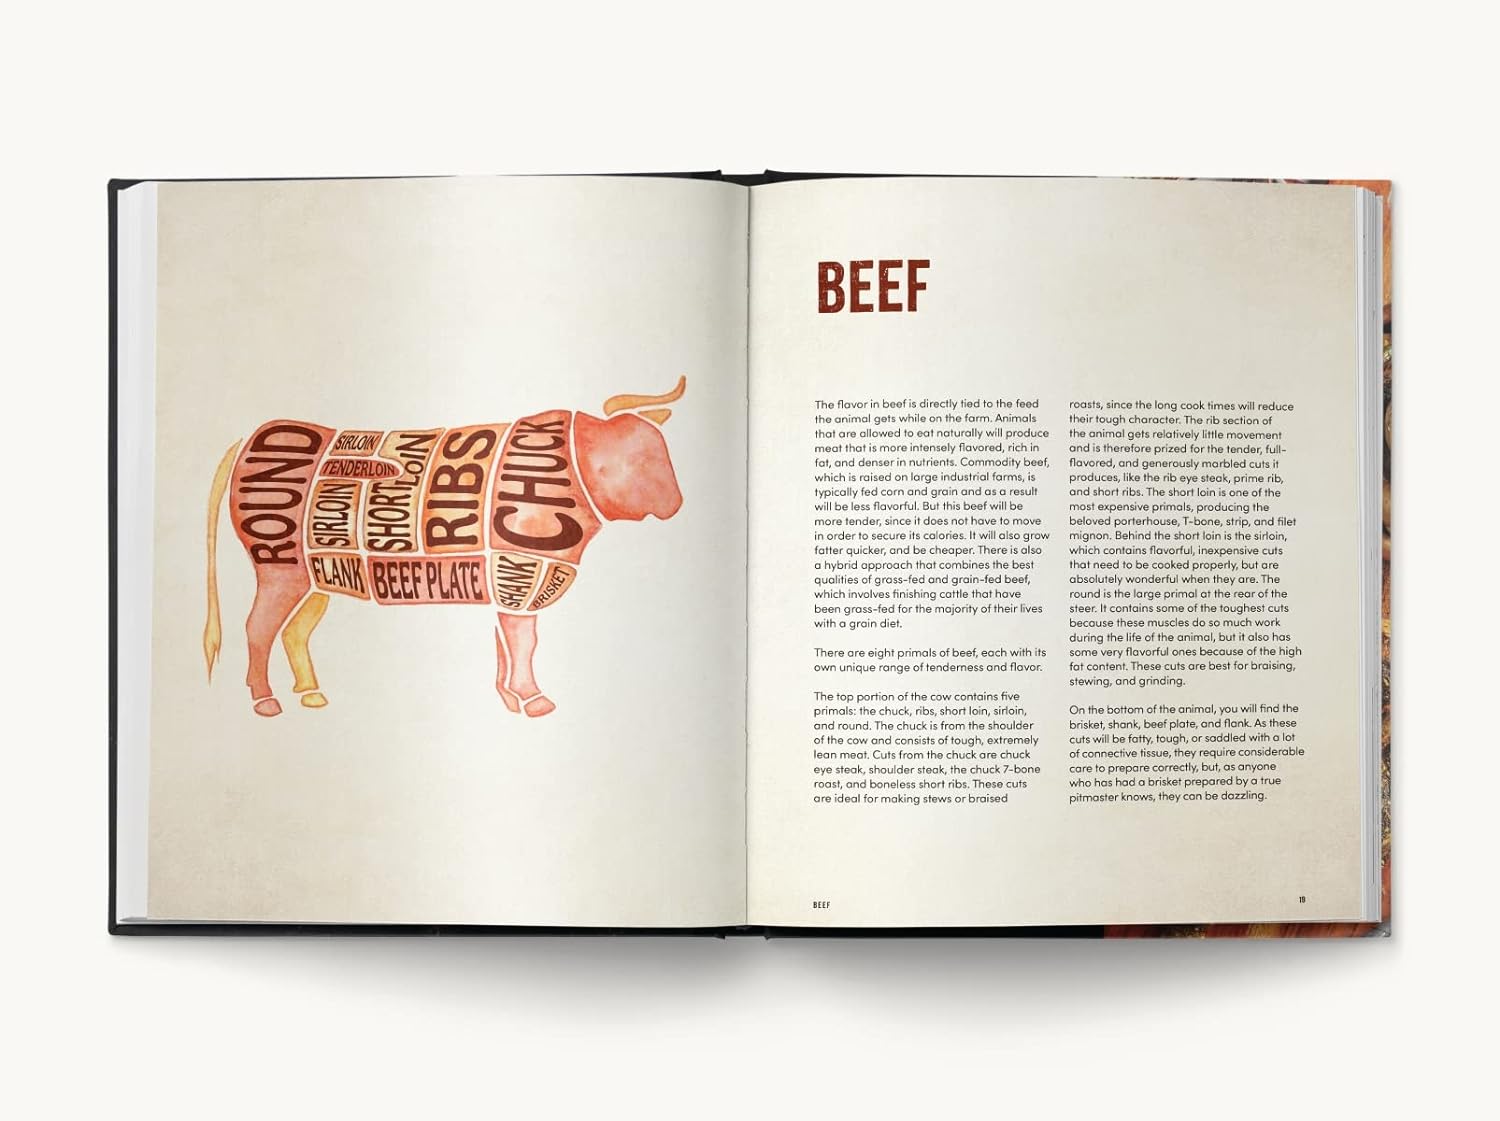 Butchery: The Ultimate Guide to Butchery and Over 100 Recipes (Luis Robles, Vanessa Ceceña)